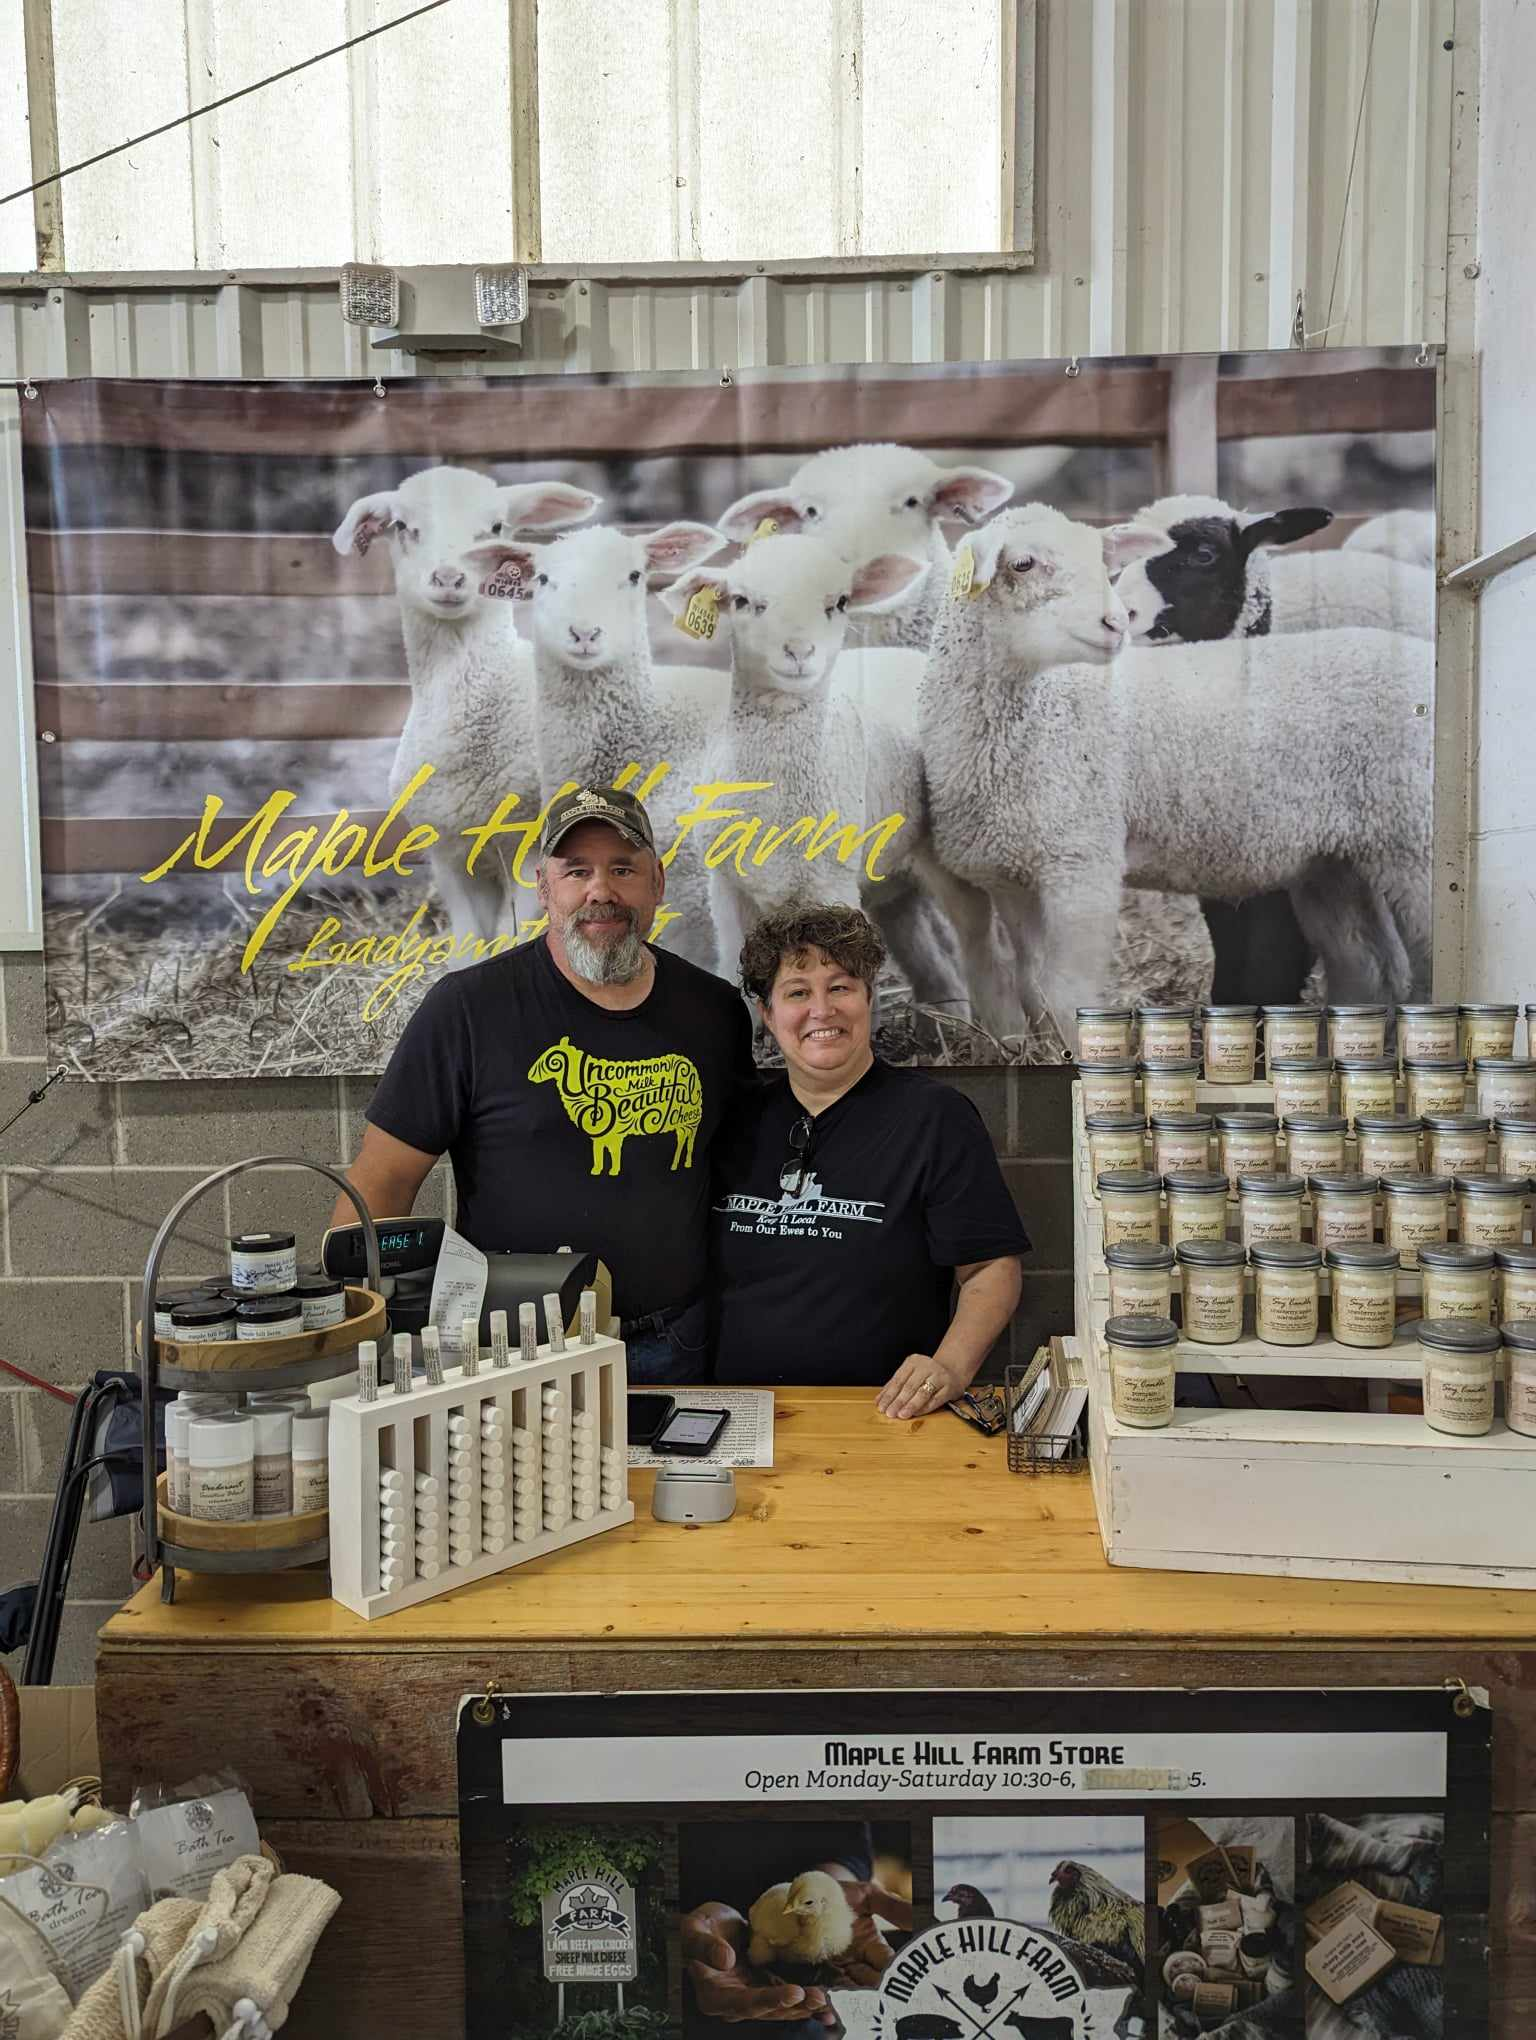 Sheep Dairy Products Gaining Popularity